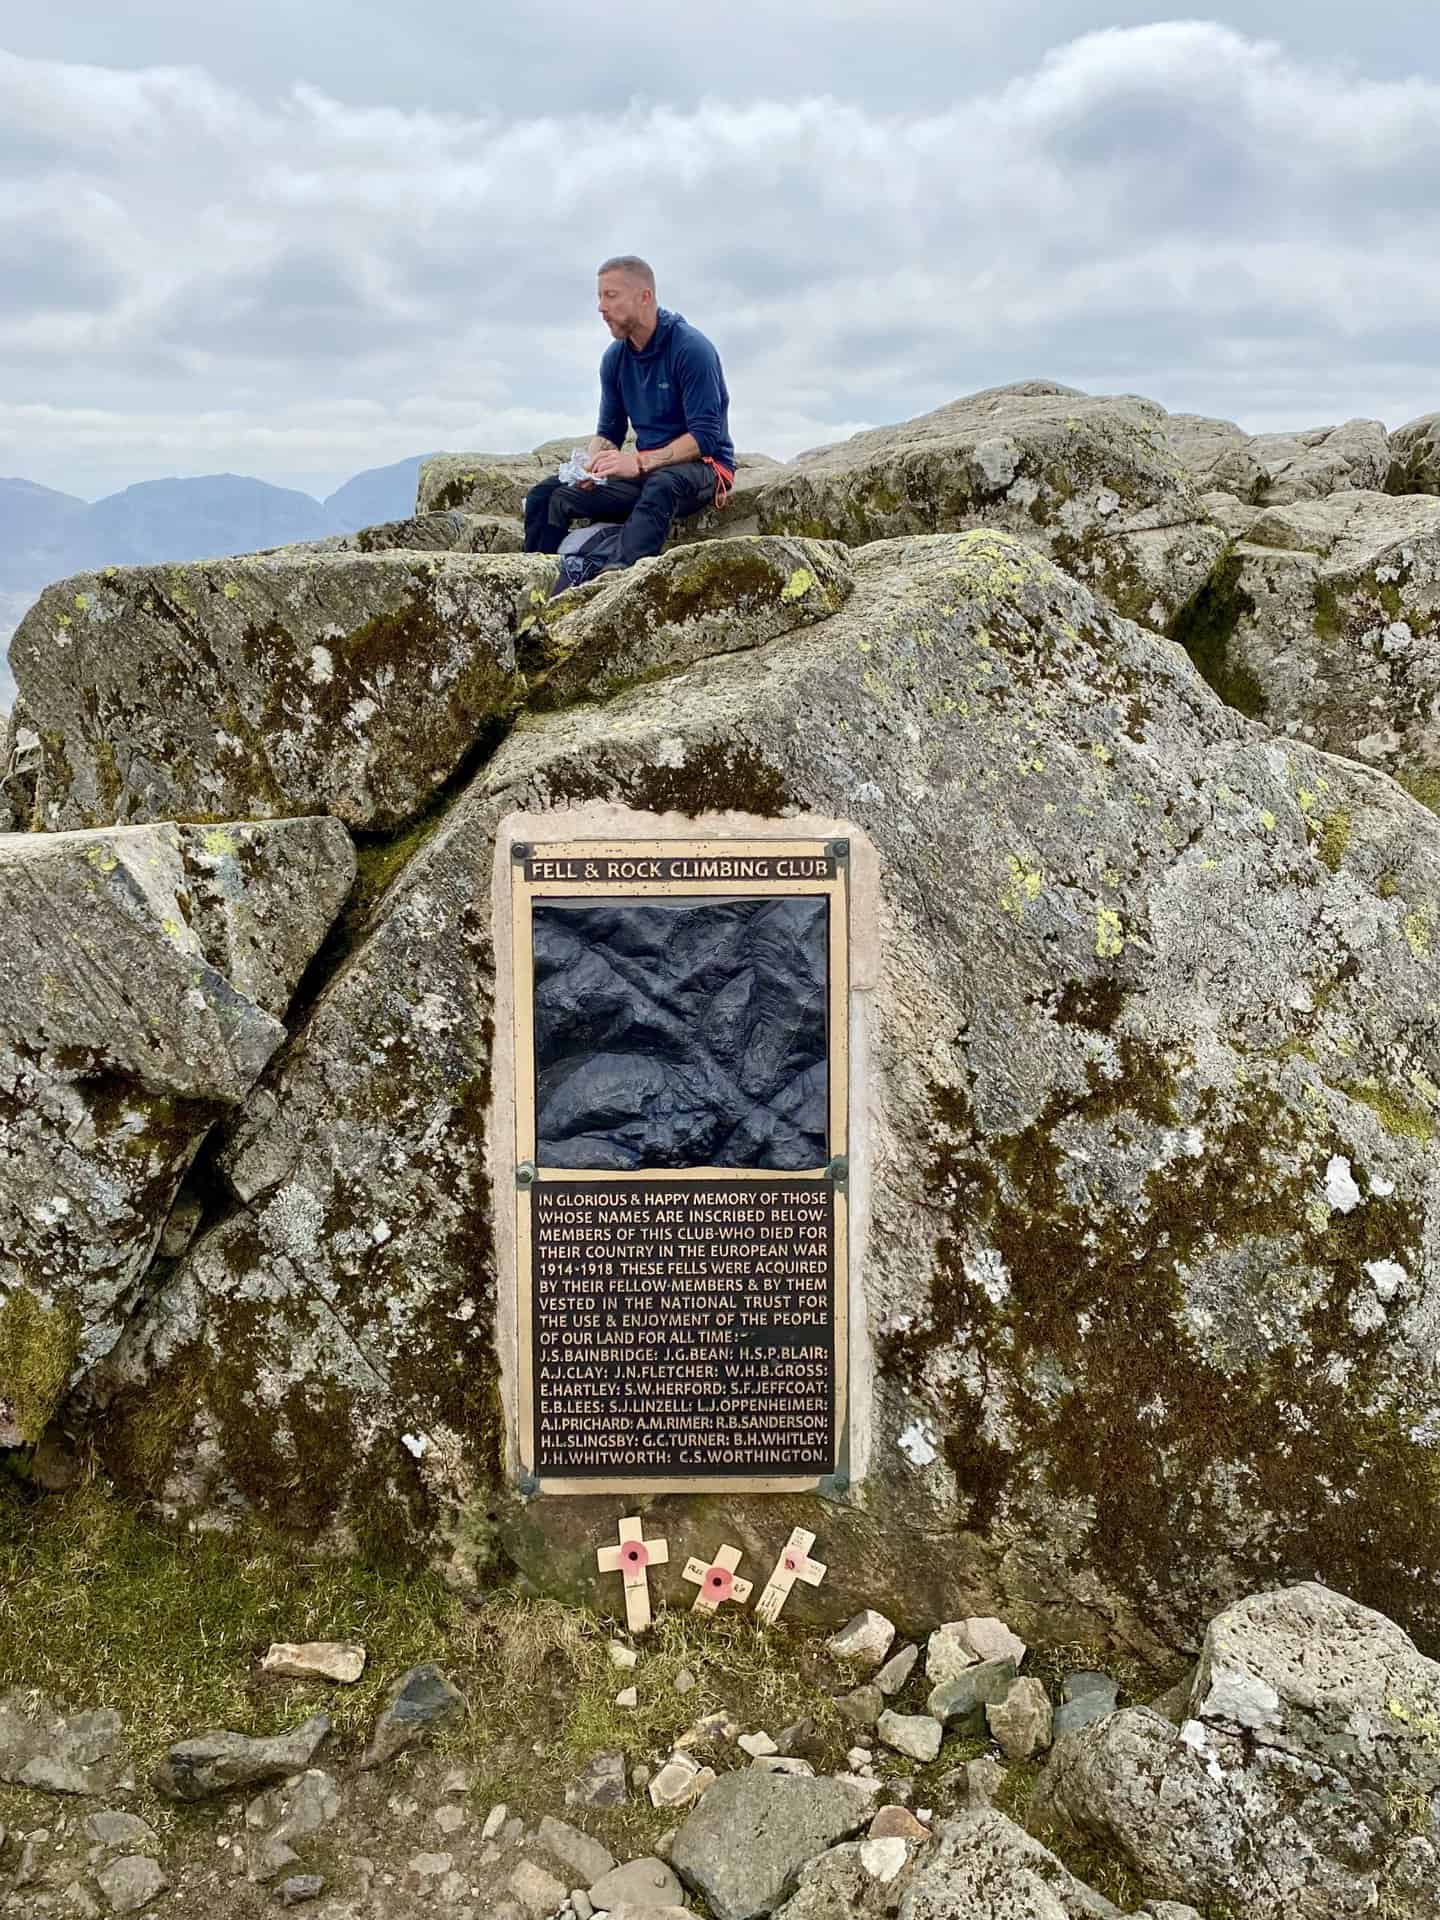 The summit of Great Gable, height 899 metres (2949 feet).